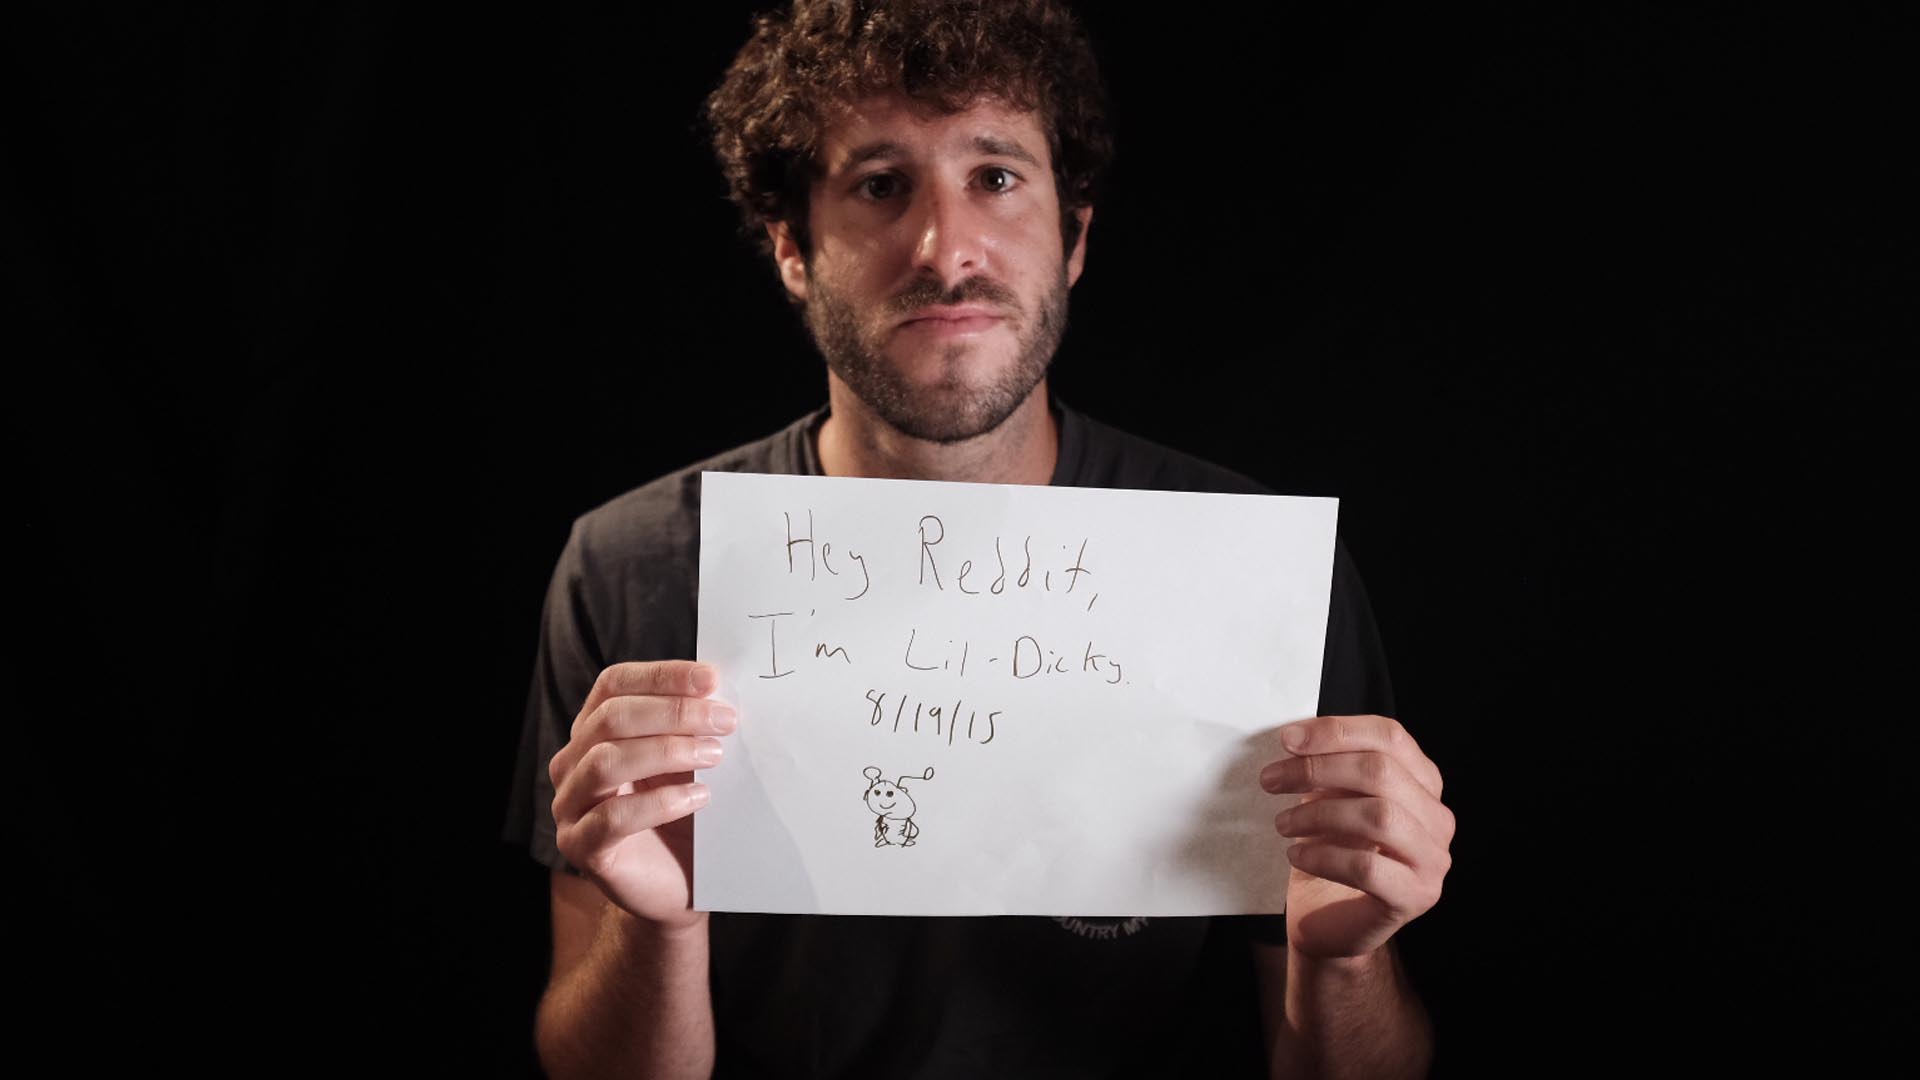 curley hudson share lil dicky small penis photos